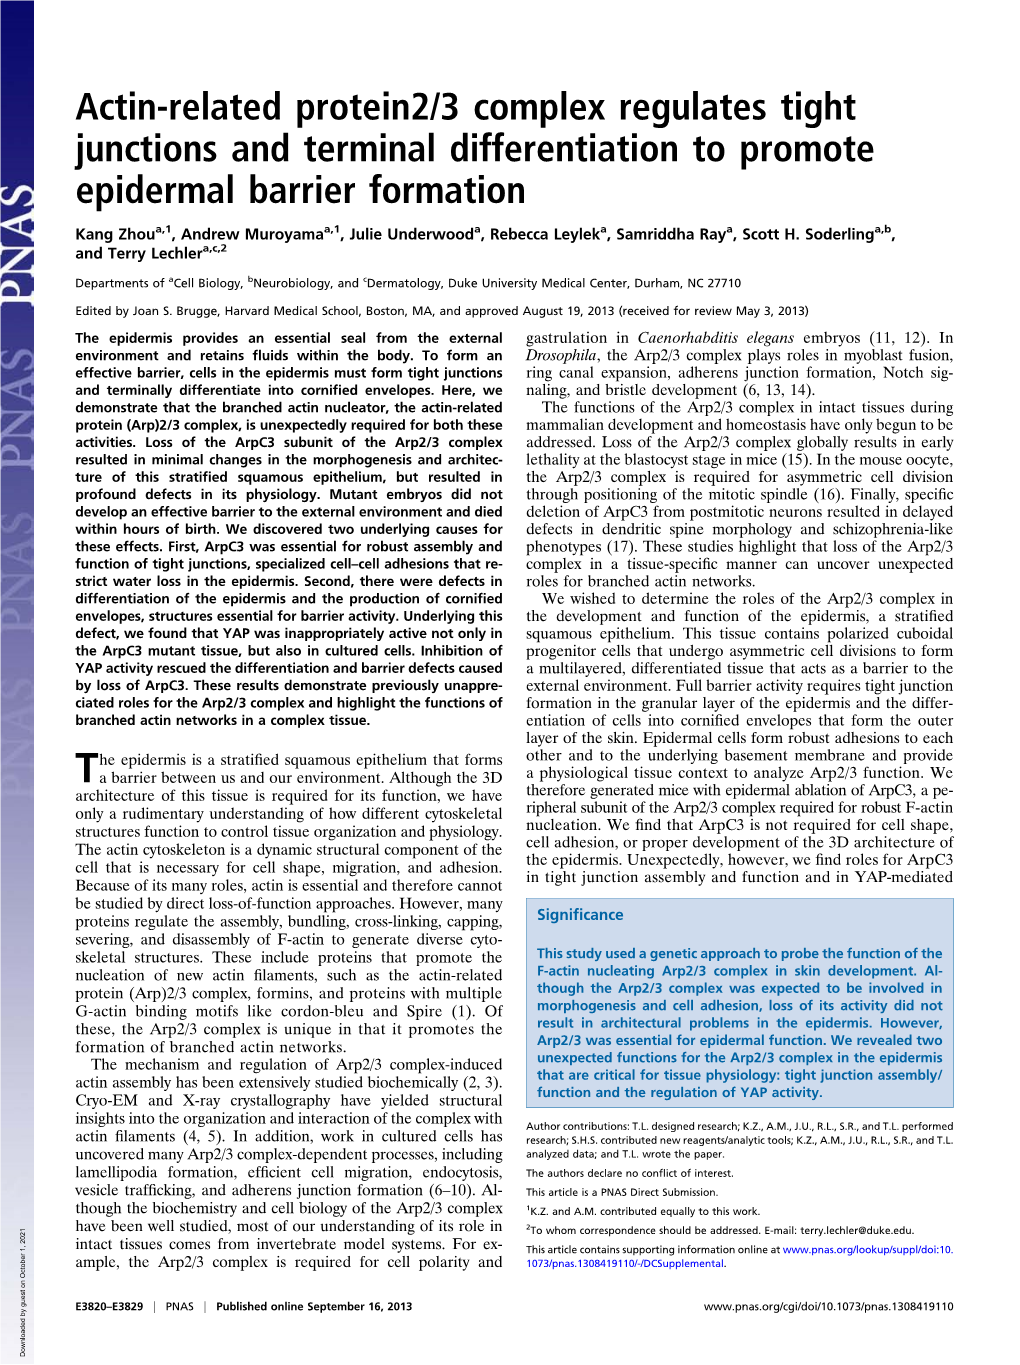 Actin-Related Protein2/3 Complex Regulates Tight Junctions and Terminal Differentiation to Promote Epidermal Barrier Formation